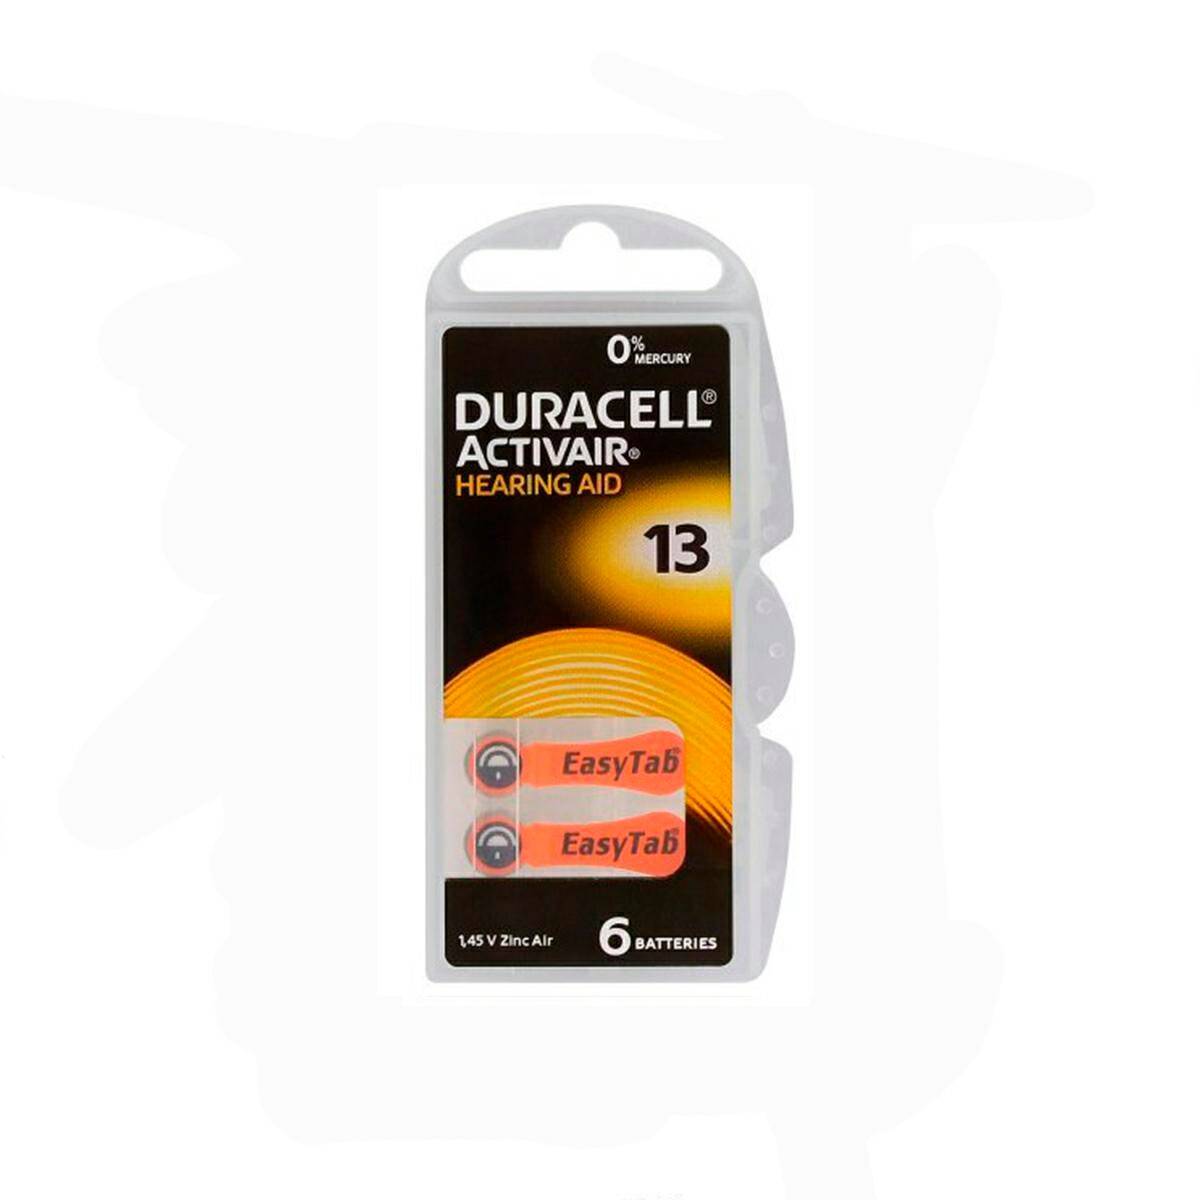 Batterie Duracell Hearing AID 13 1,45V